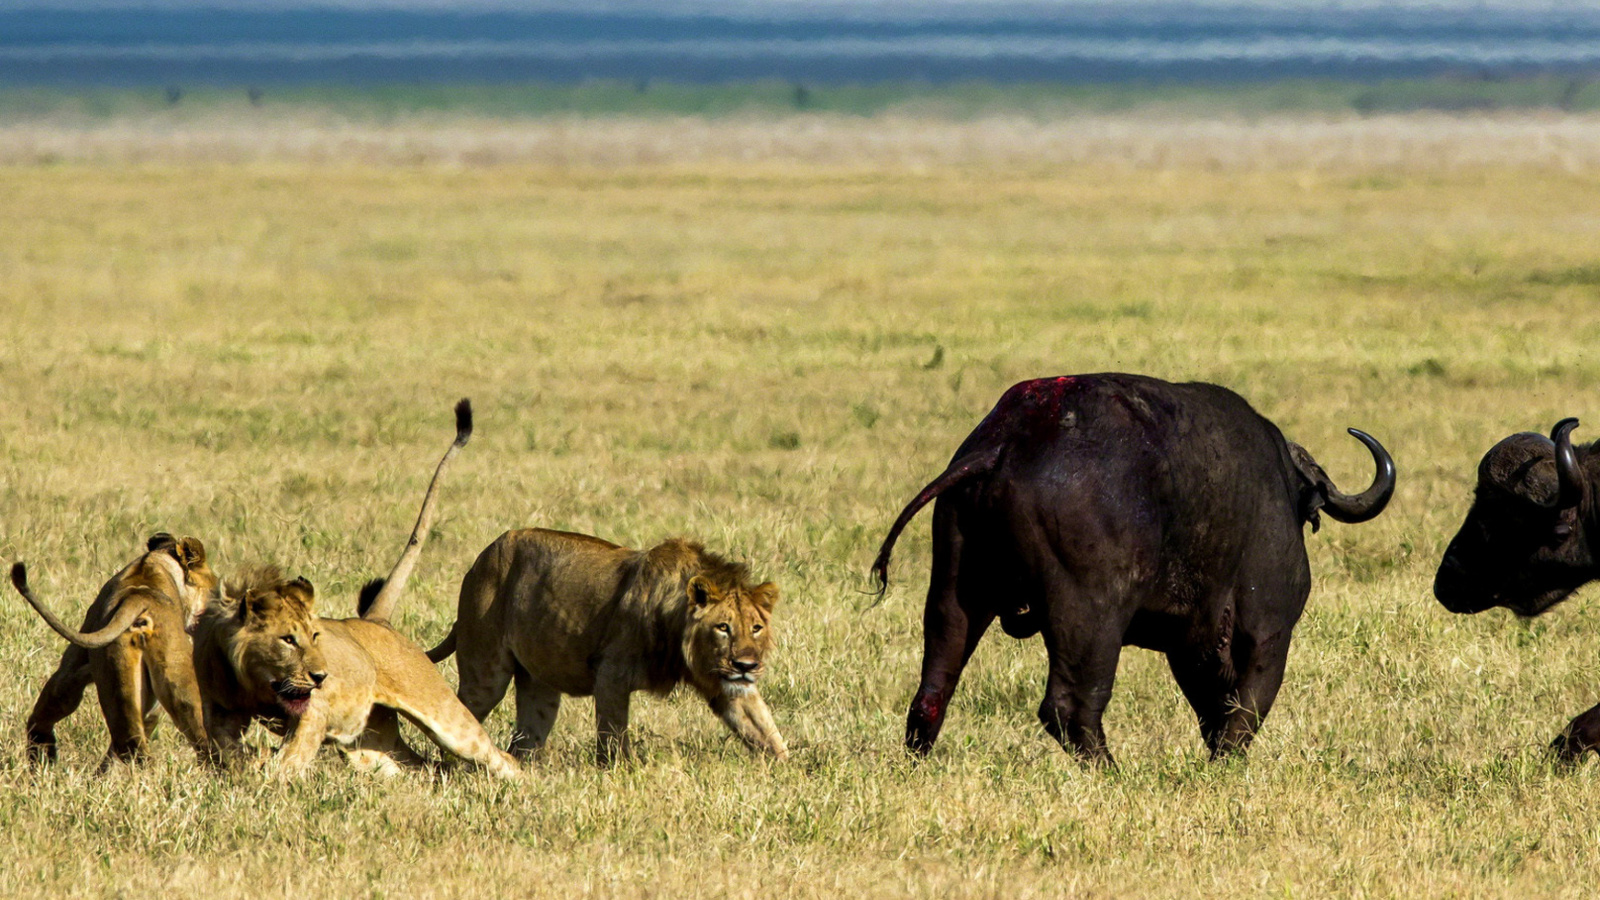 Lions and Buffaloes wallpaper 1600x900